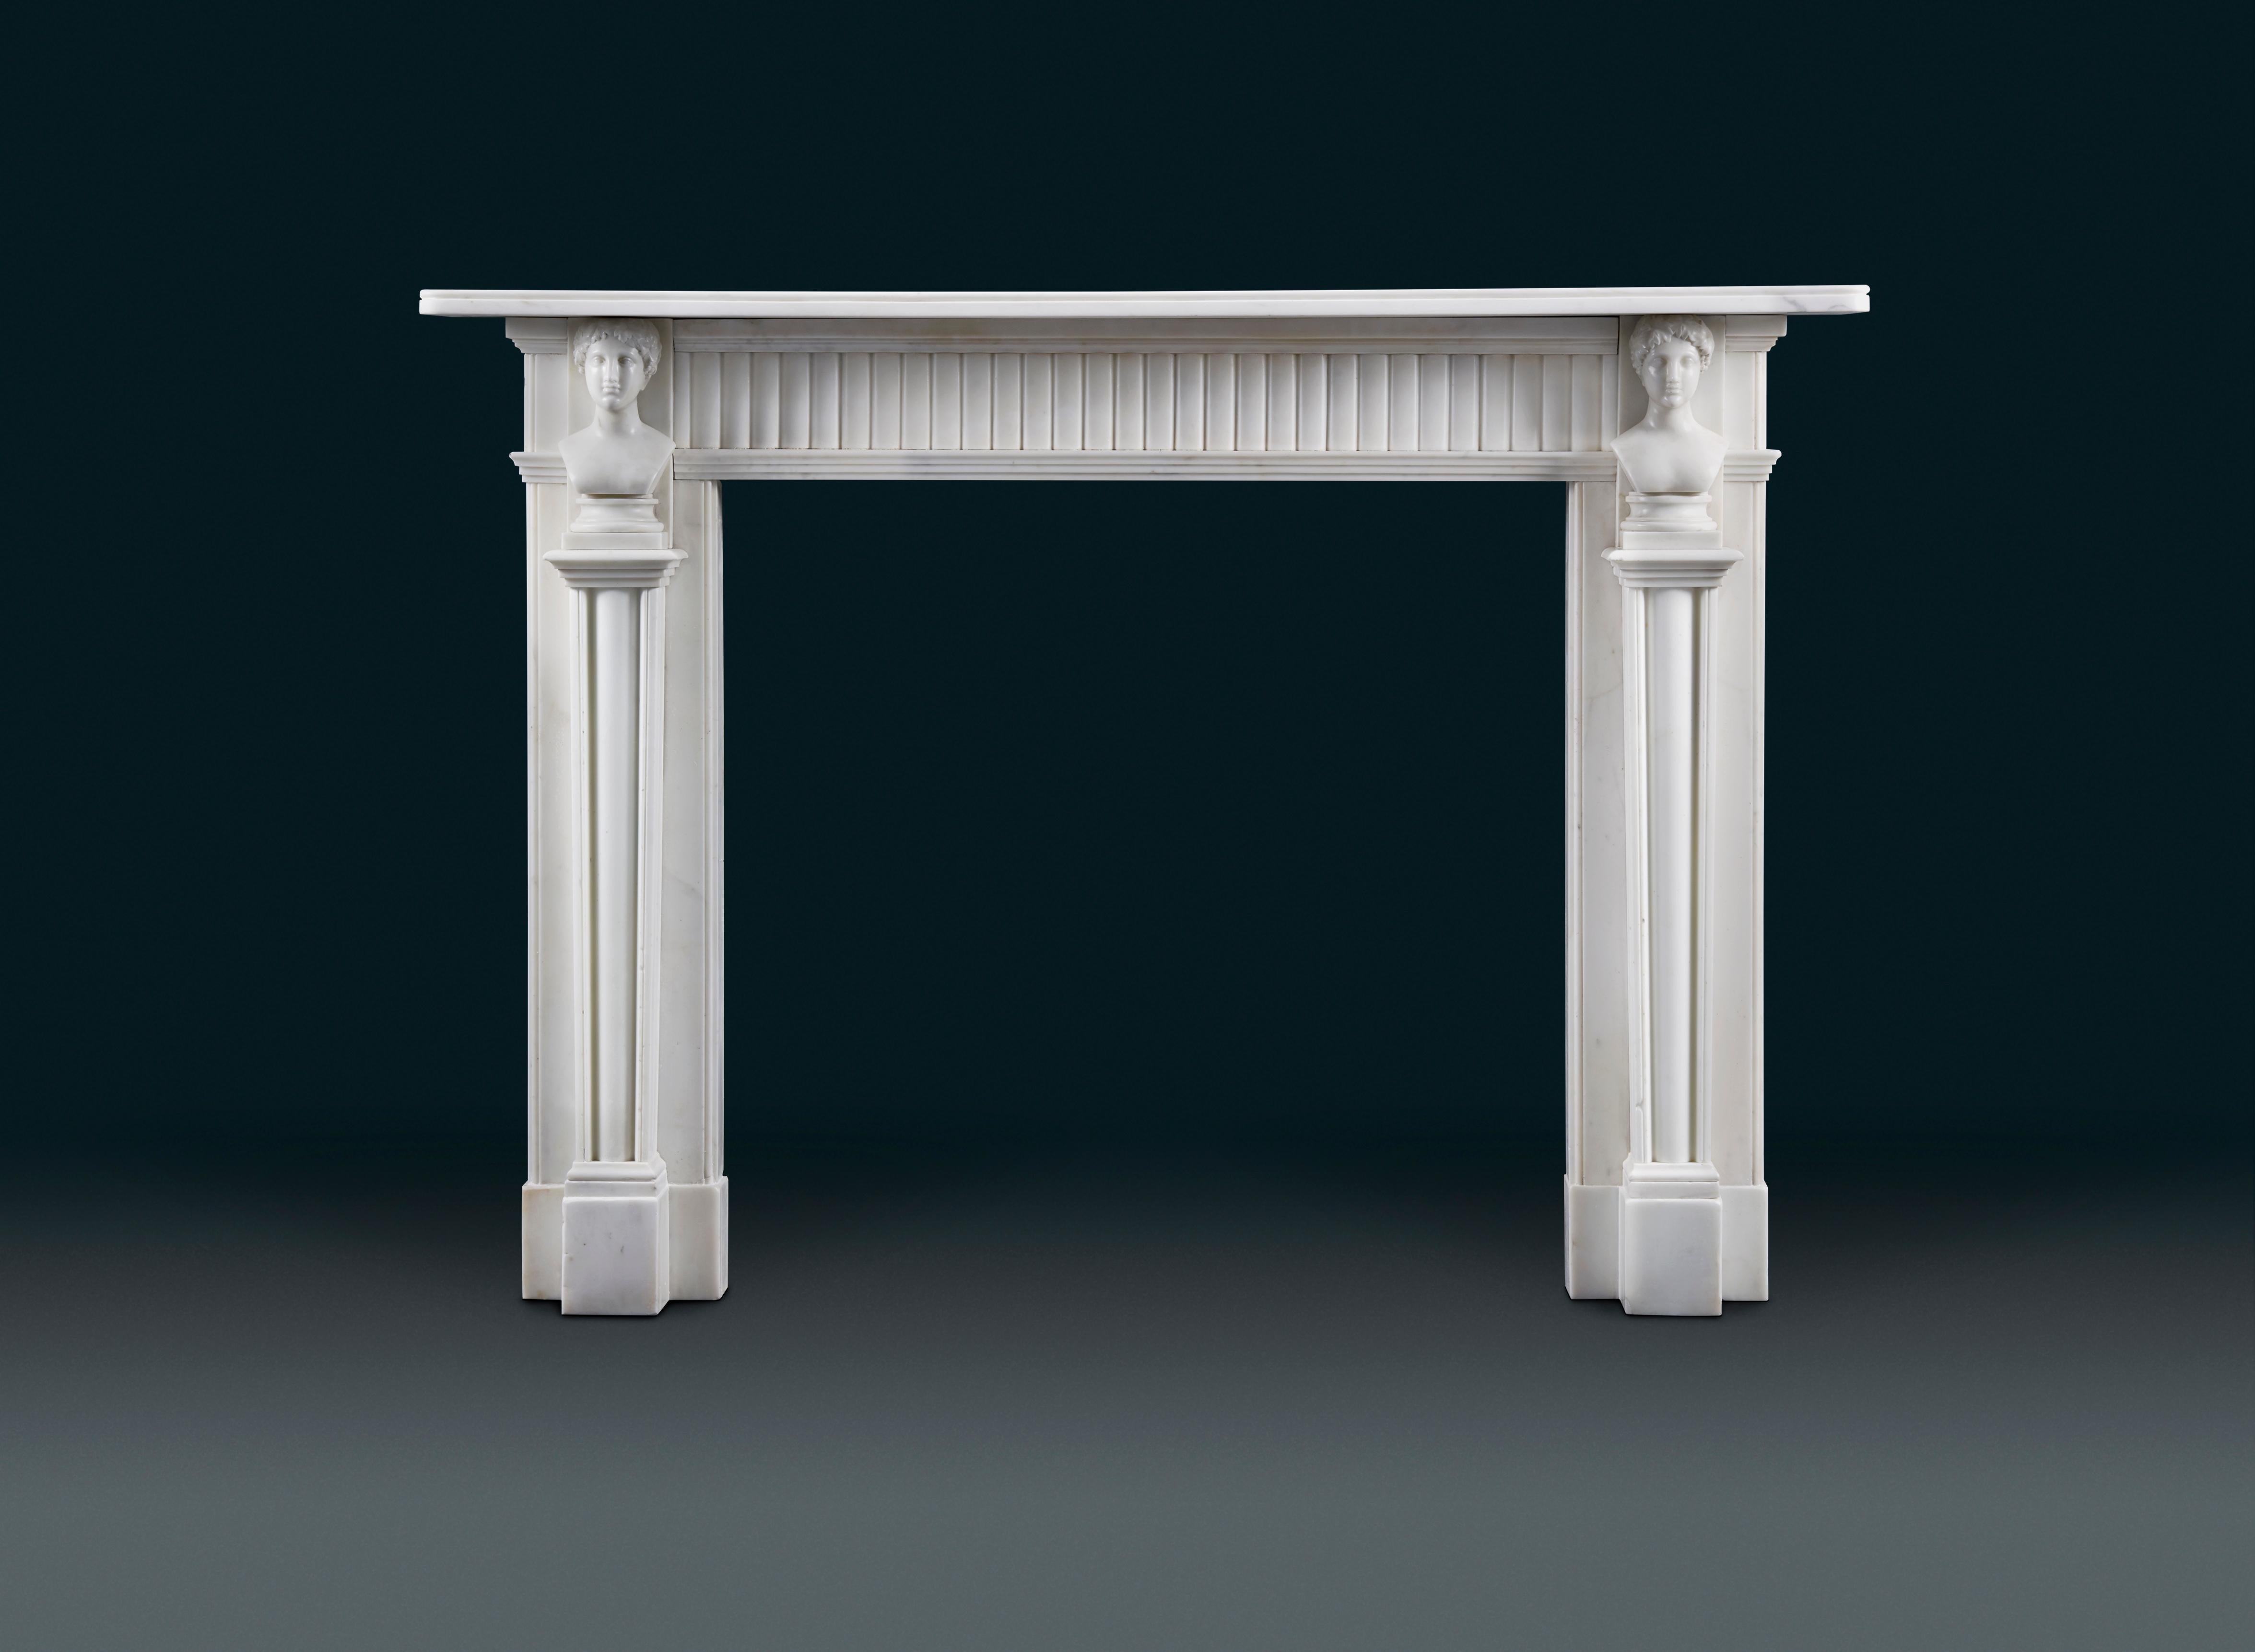 A good antique Irish, late 18th century neoclassical statuary marble fireplace; the frieze with continuous convex rounded mouldings. The jambs faced with elegant Herm shaped, gracefully tapering pedestals decorated with convex shafts surmounted by